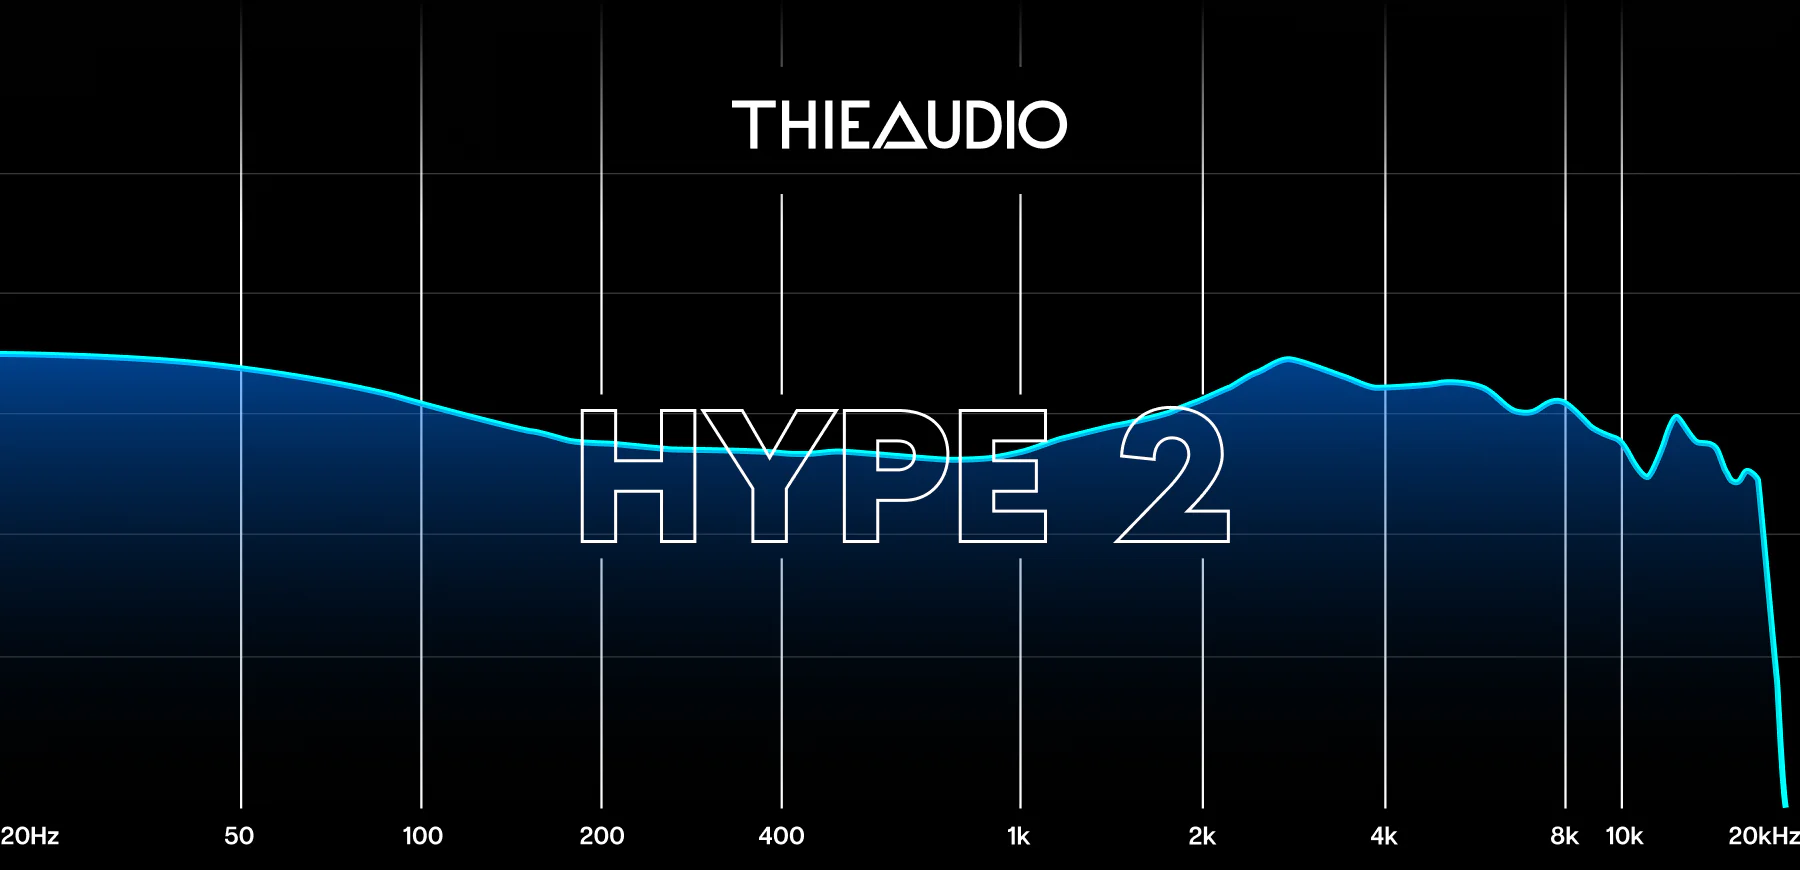 Thieaudio Hype 2 Frequency Response Graph